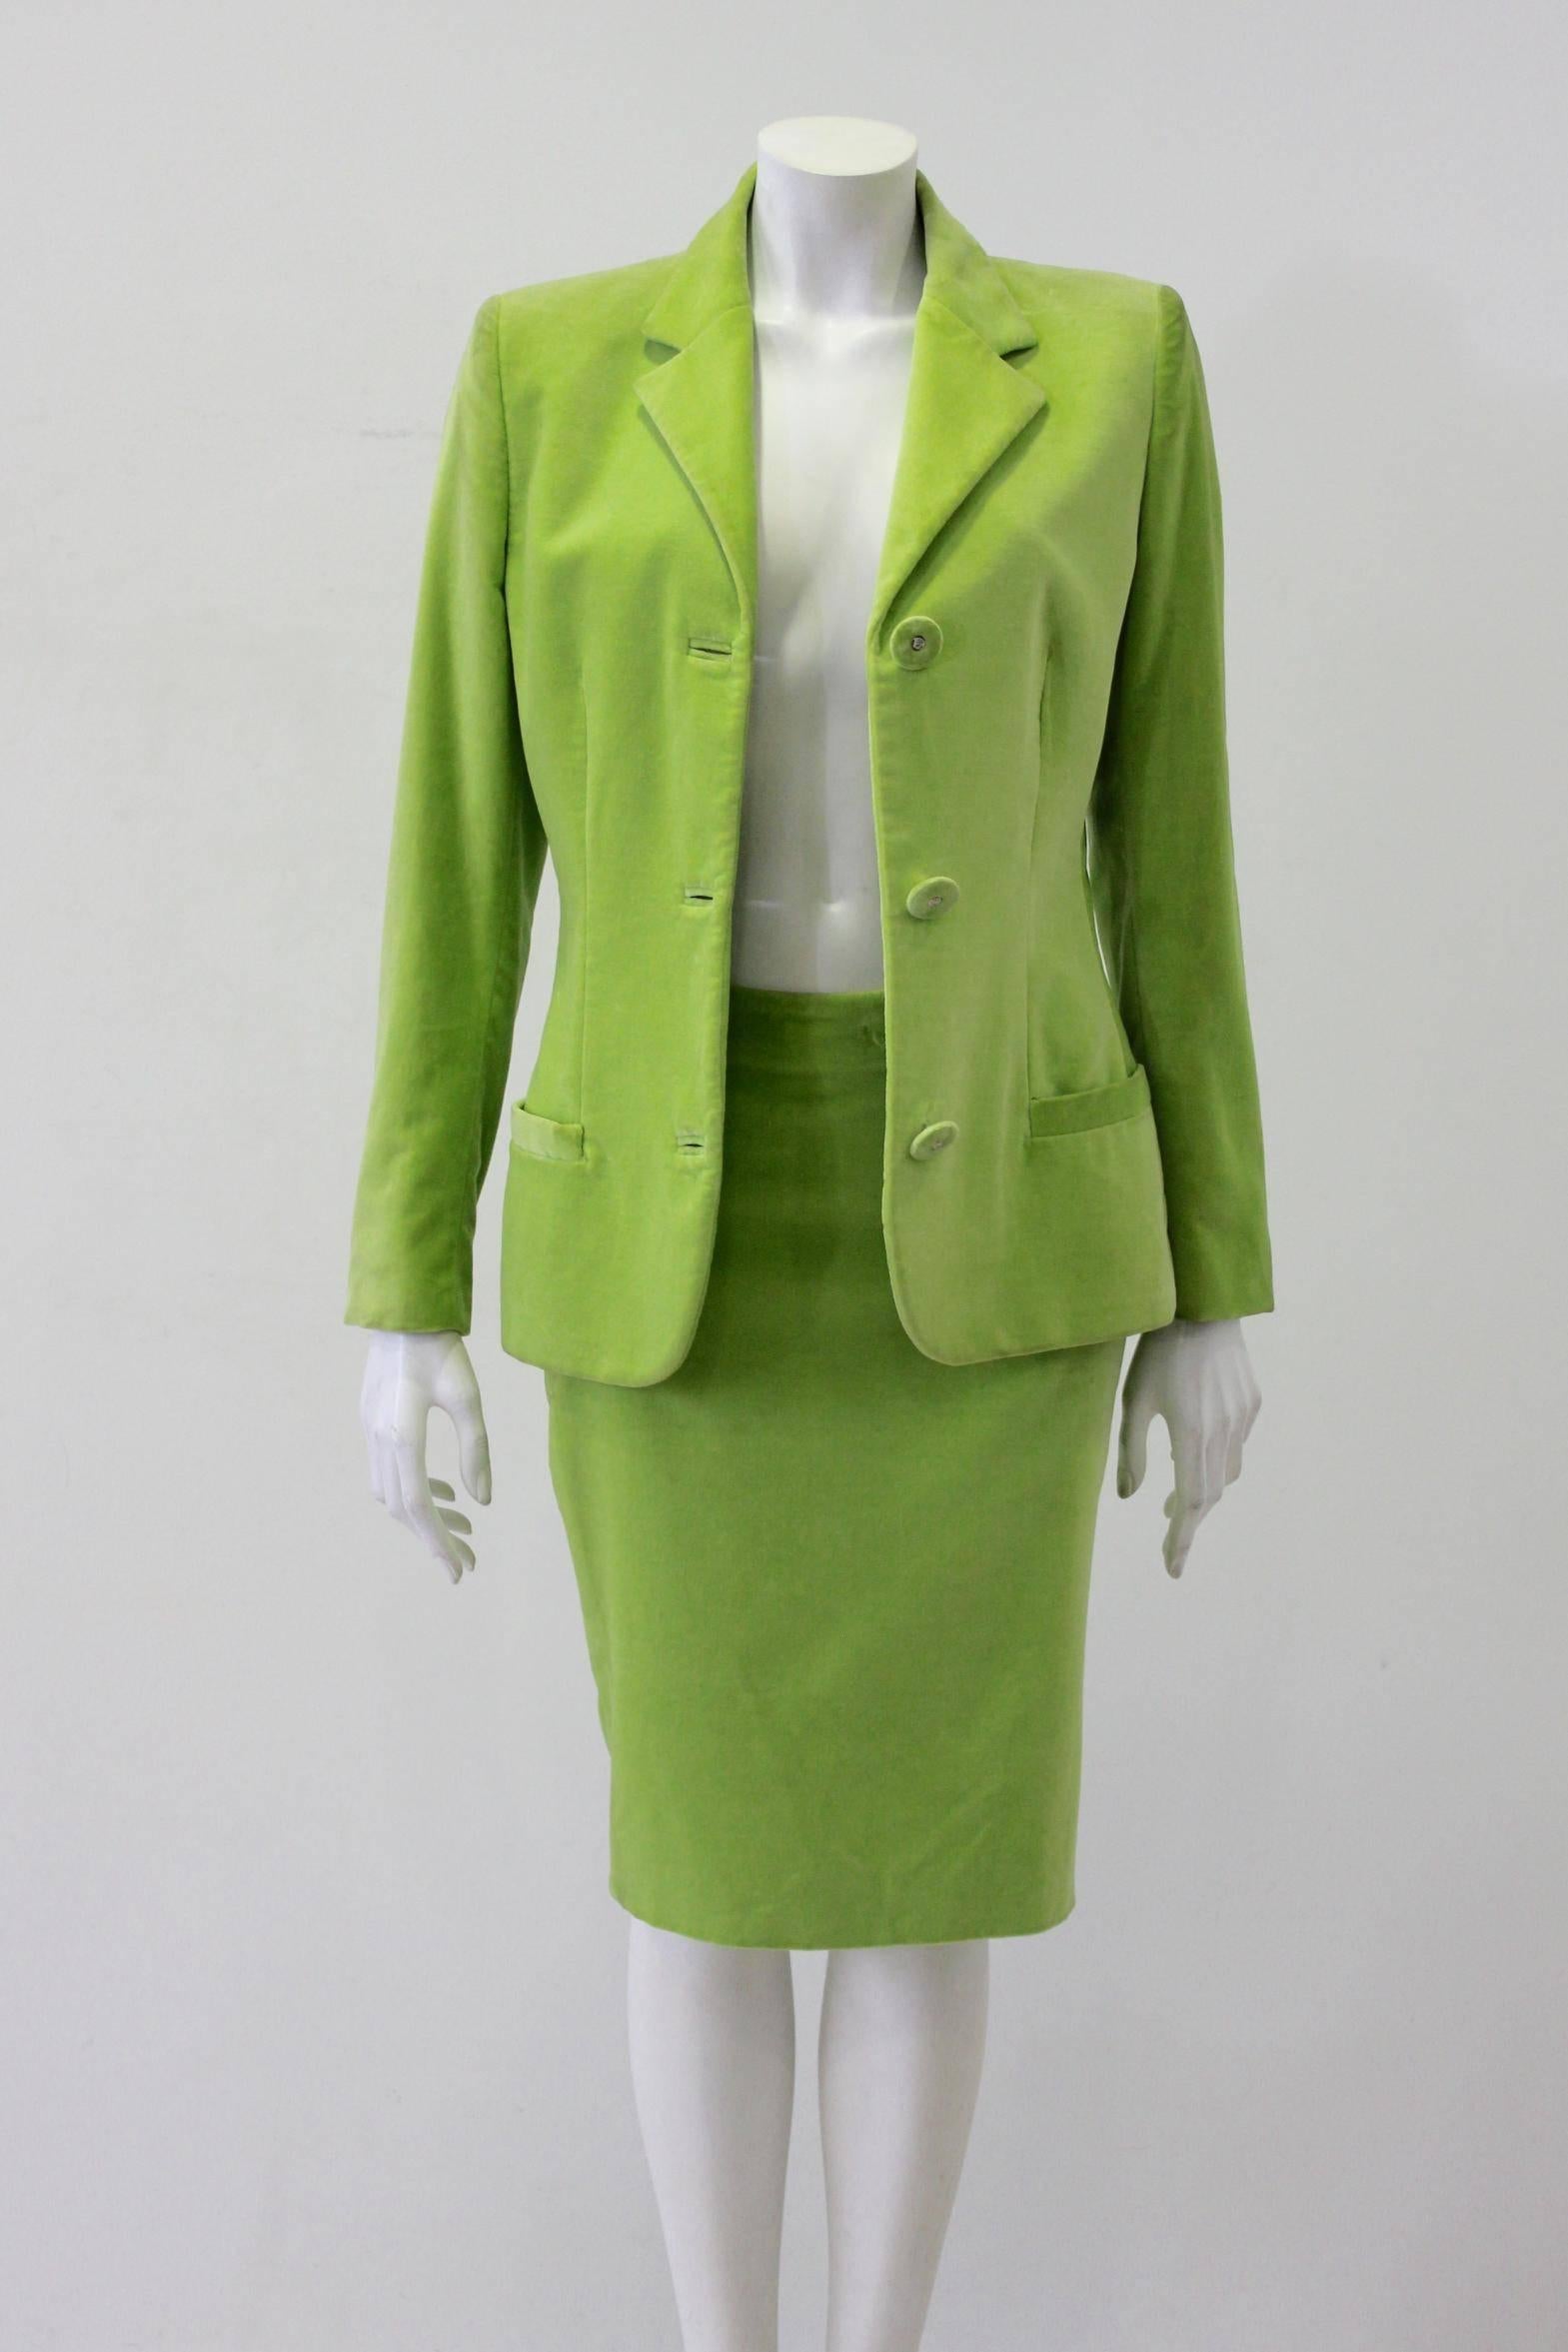 Gianni Versace Couture Lime Velvet Suit Winter 1996 For Sale 2